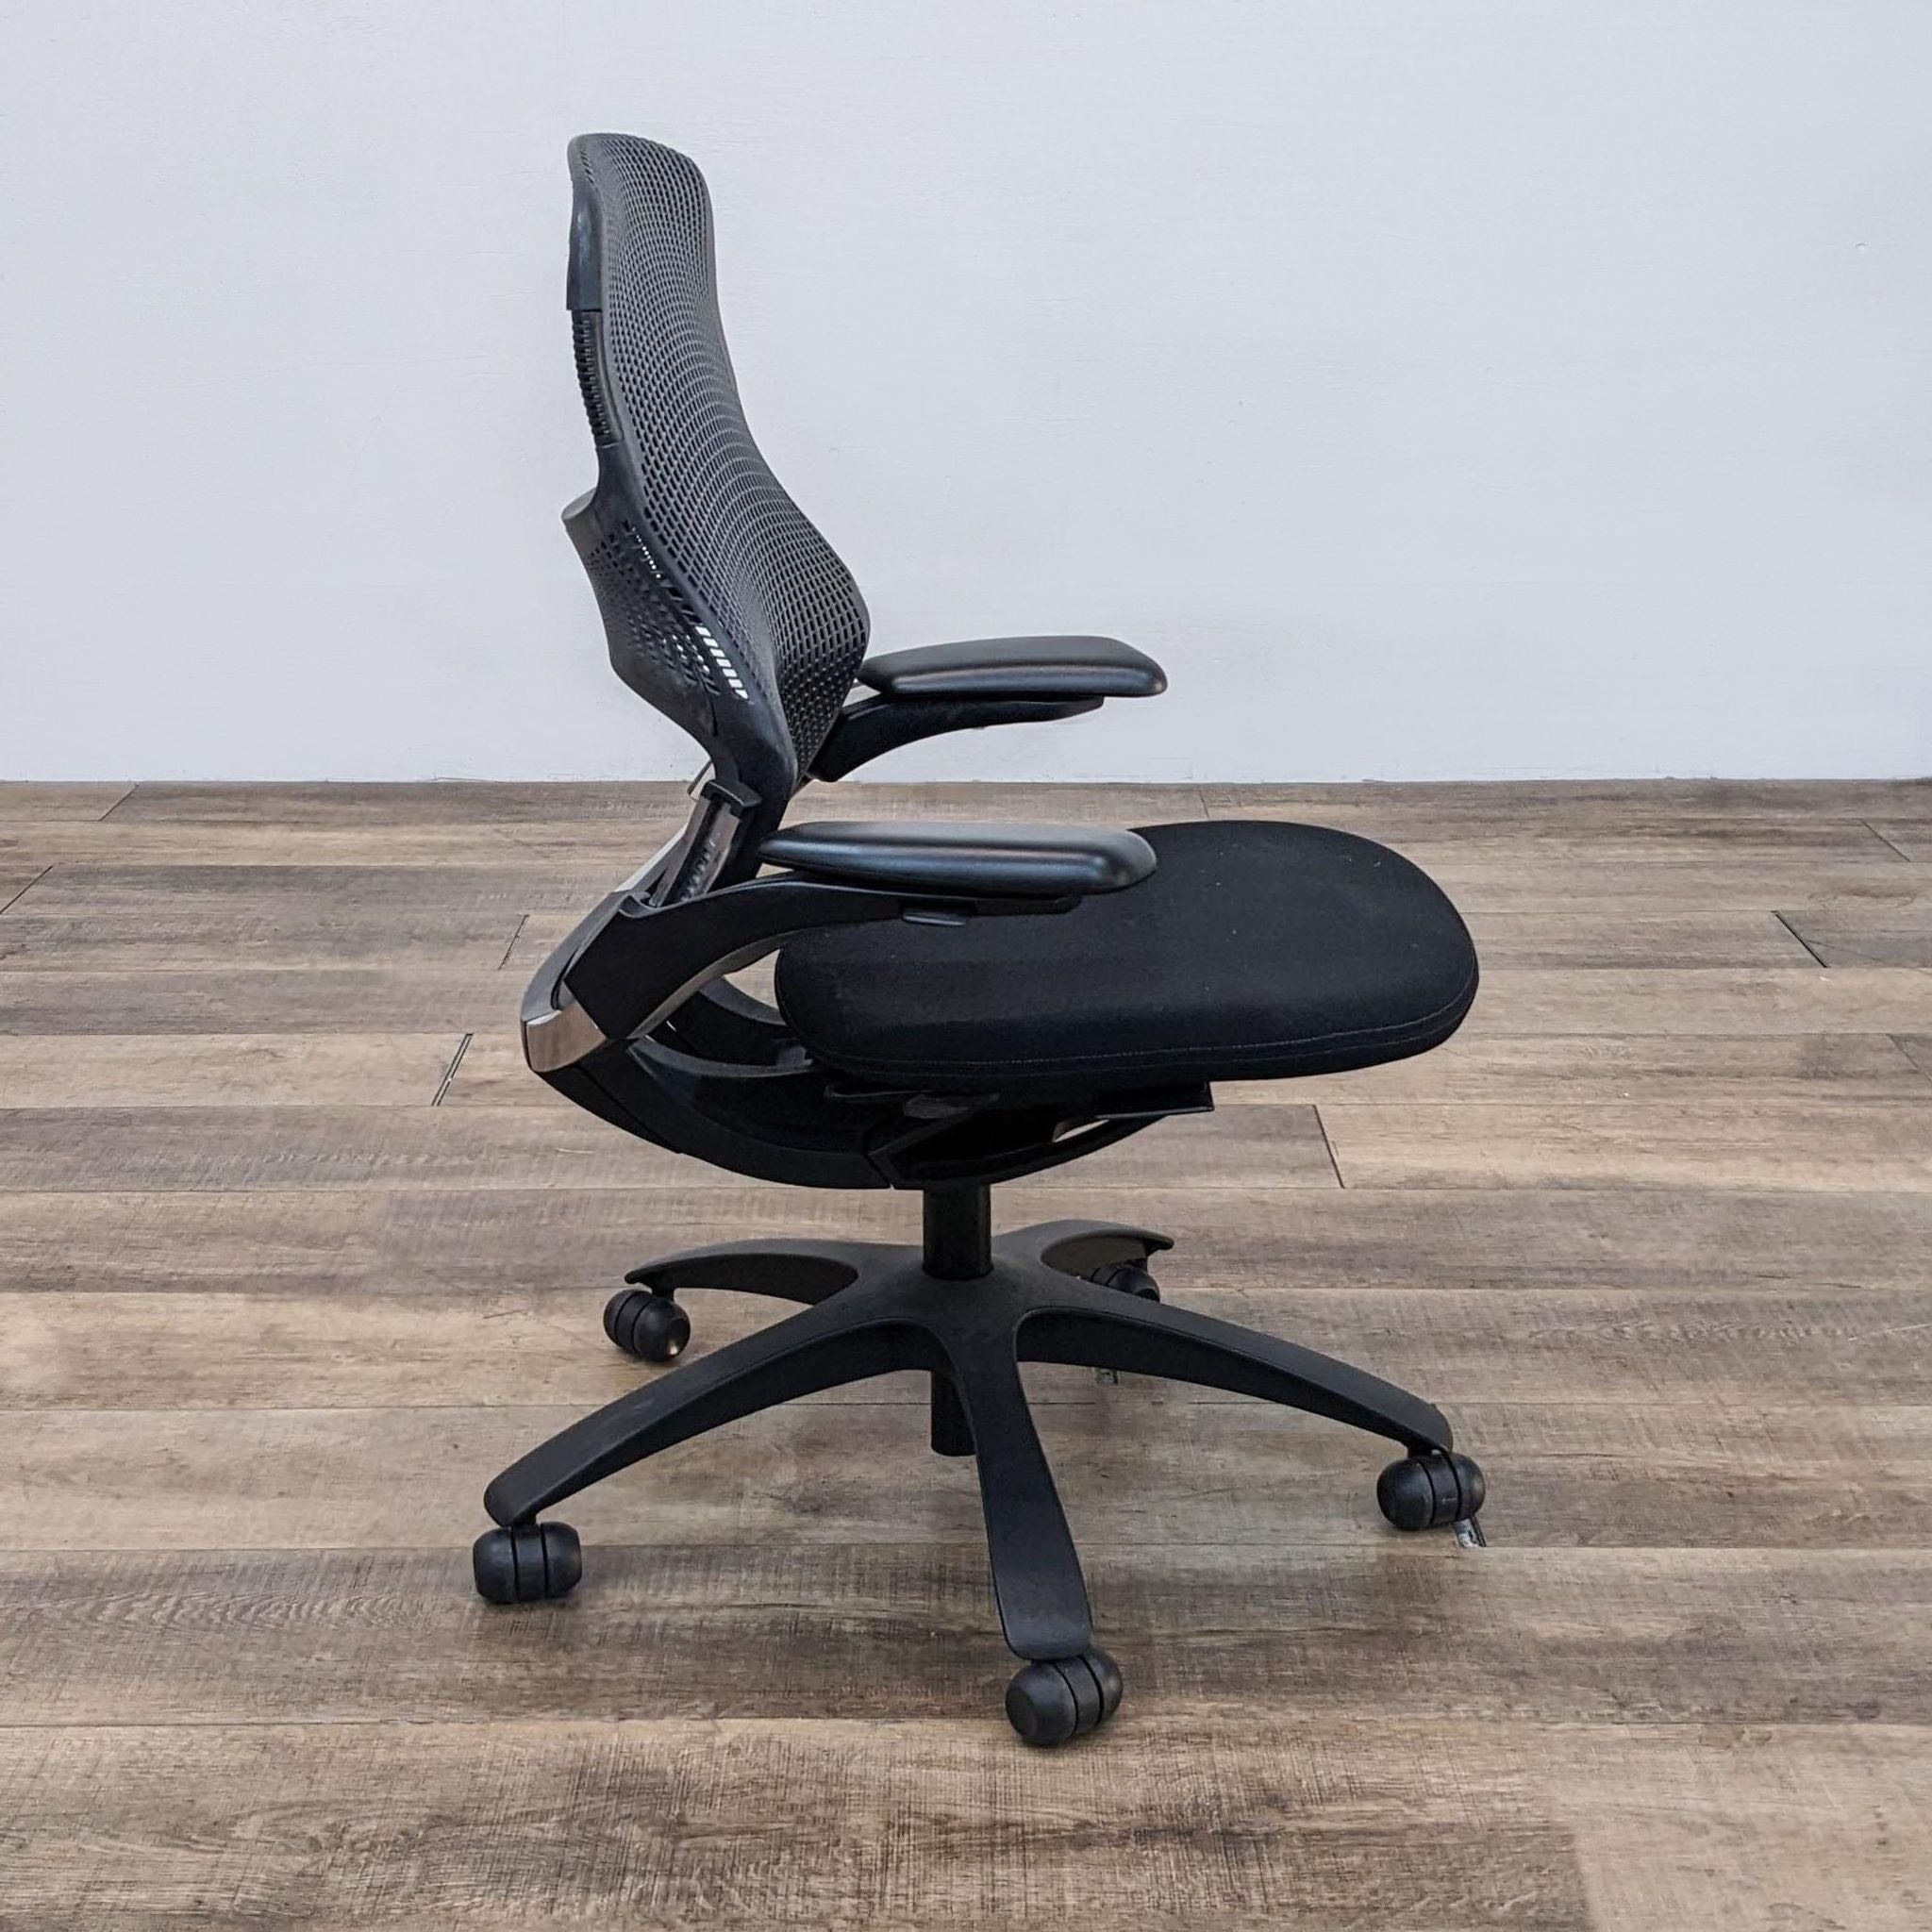 Ergonomic Knoll chair showcasing dynamic suspension and frameless seat, set against neutral background.